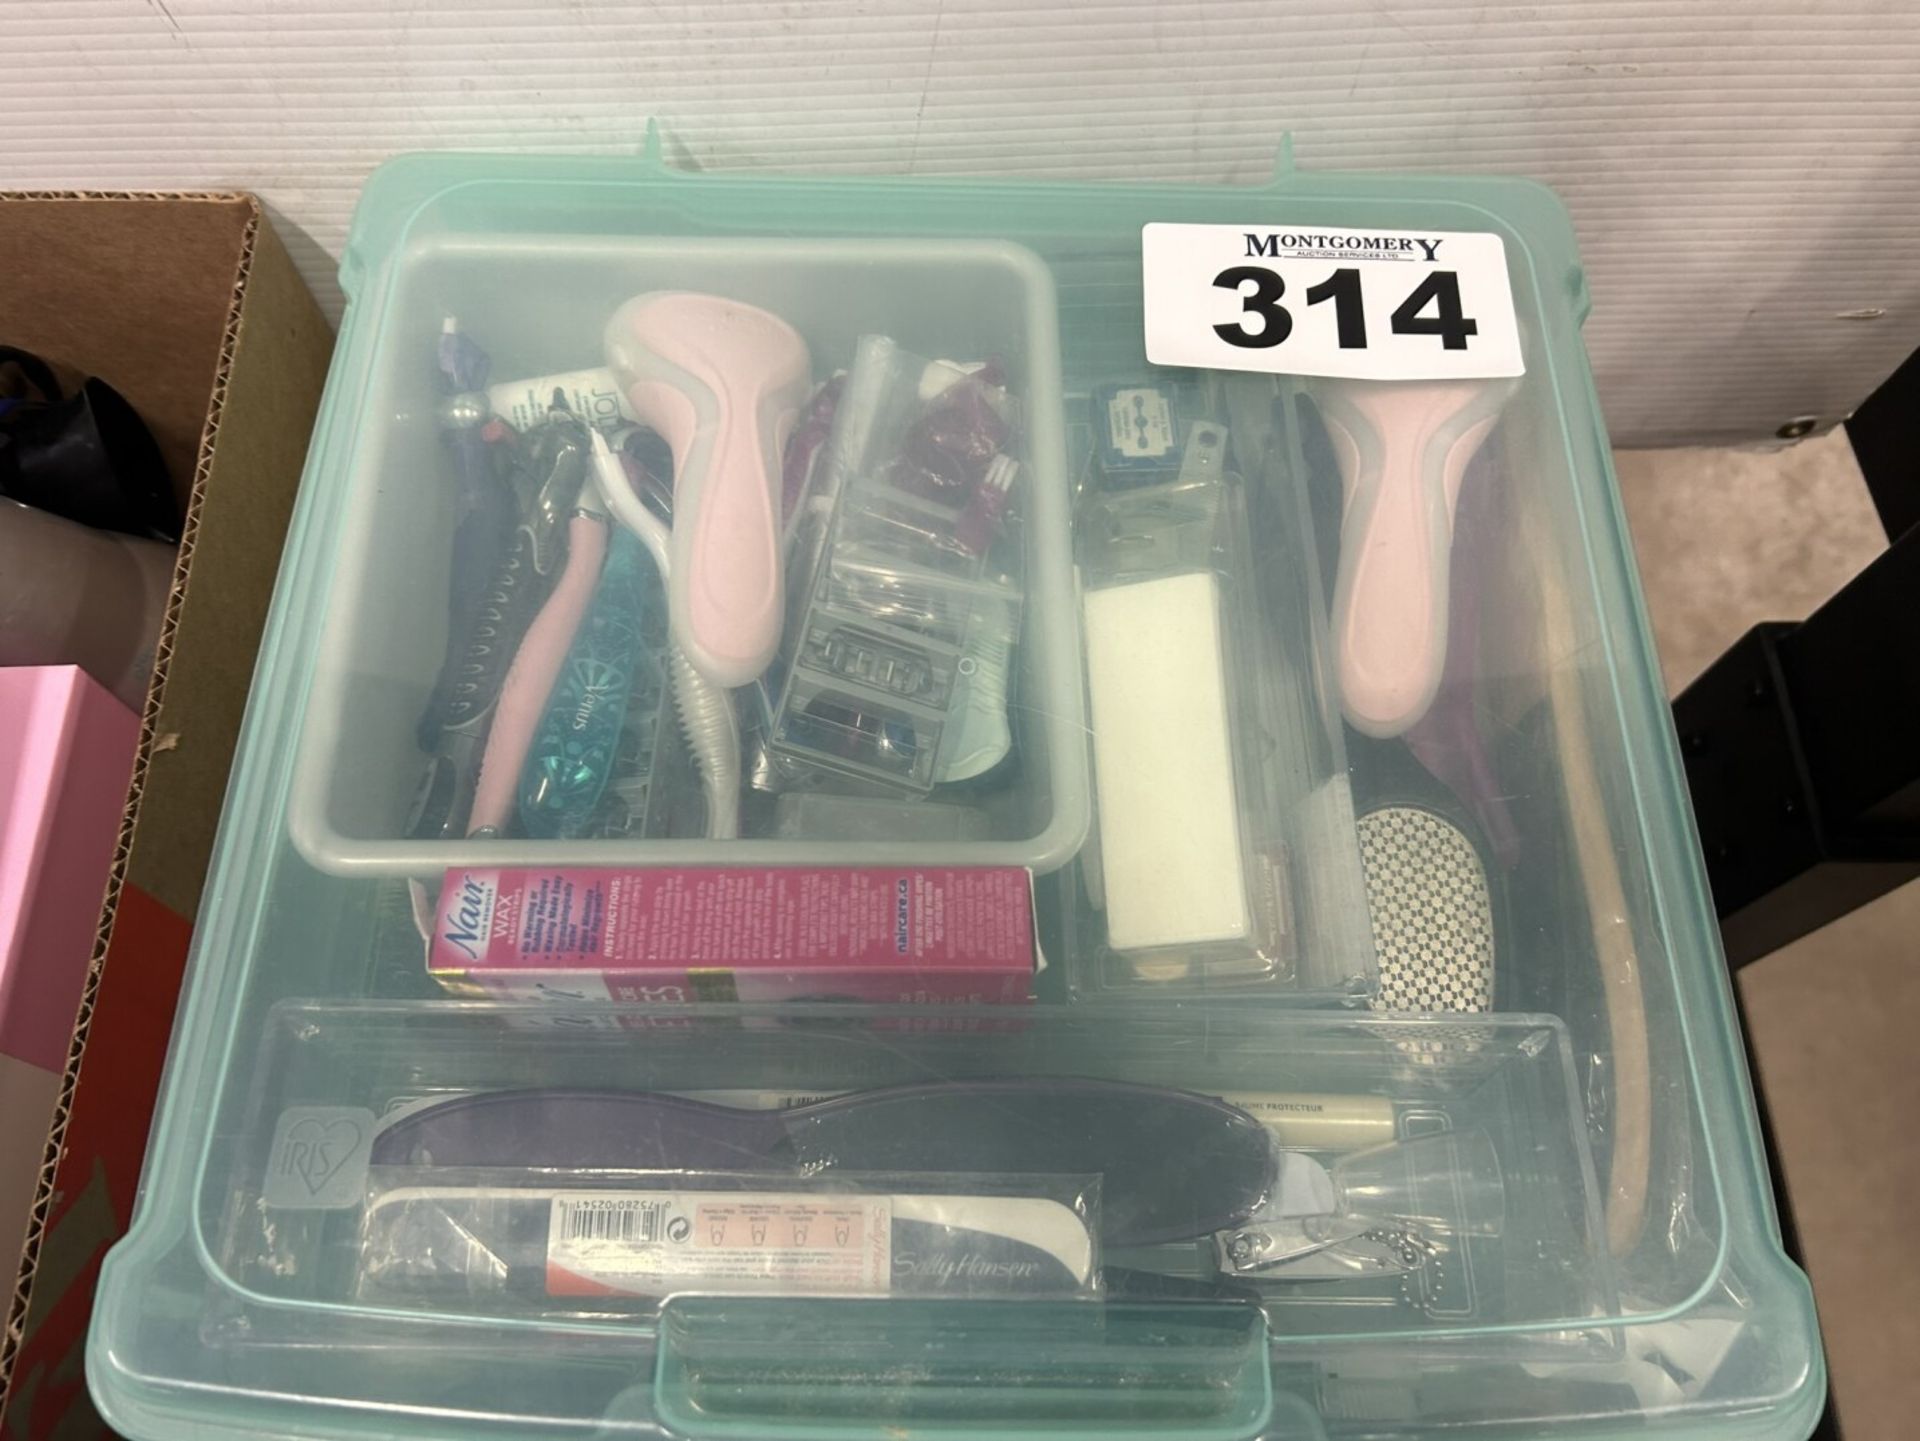 L/O ASSORTED BATHROOM ITEMS, CURLING IRONS, HAIR DRYER, PERSONAL GROOMING, ETC. - Image 9 of 24